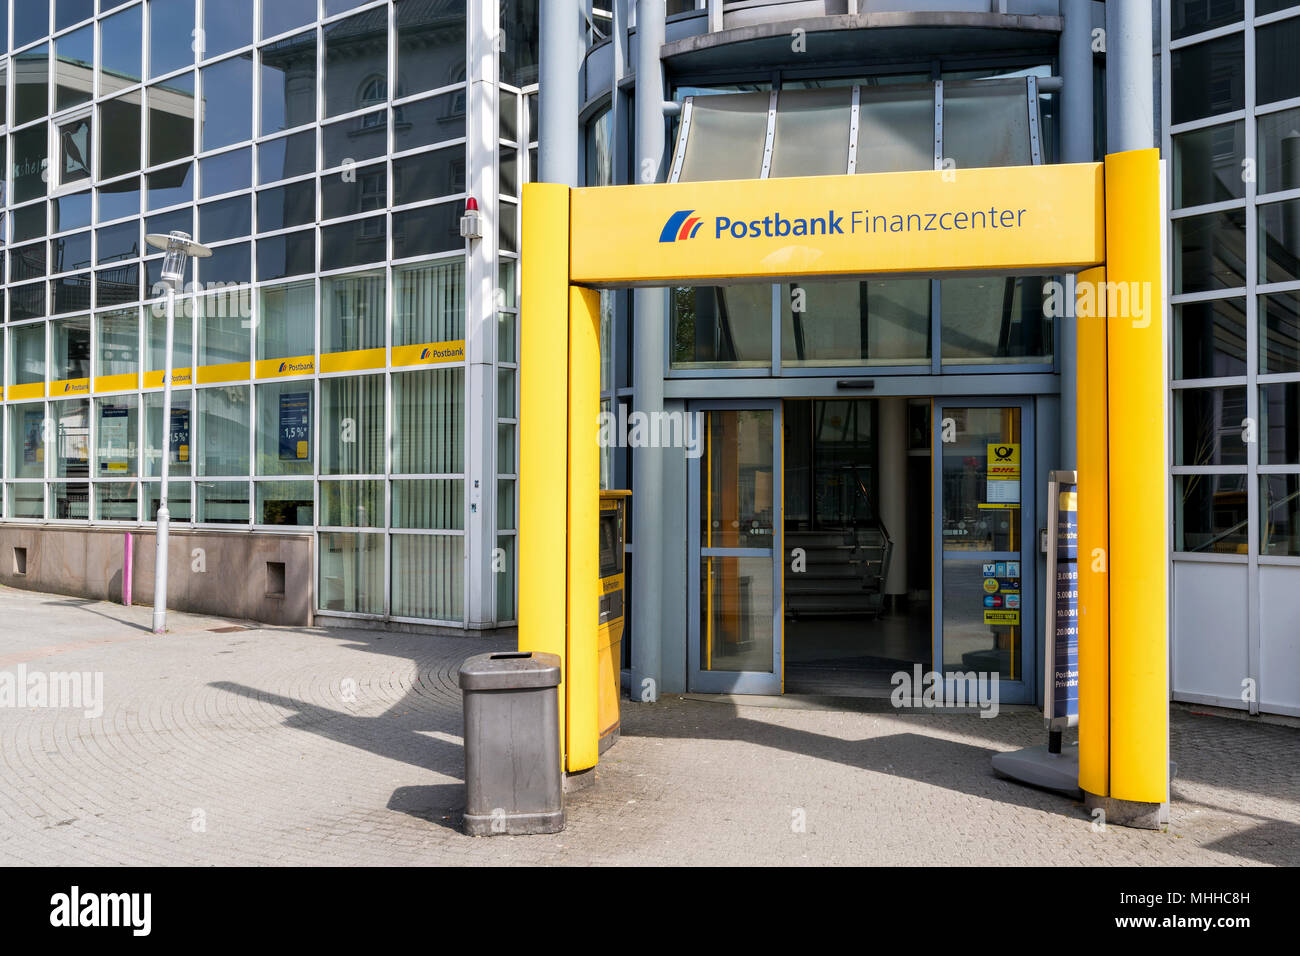 entrance of a Postbank Finanzcenter. Deutsche Postbank is a German retail bank with headquarters in Bonn, Germany. Stock Photo